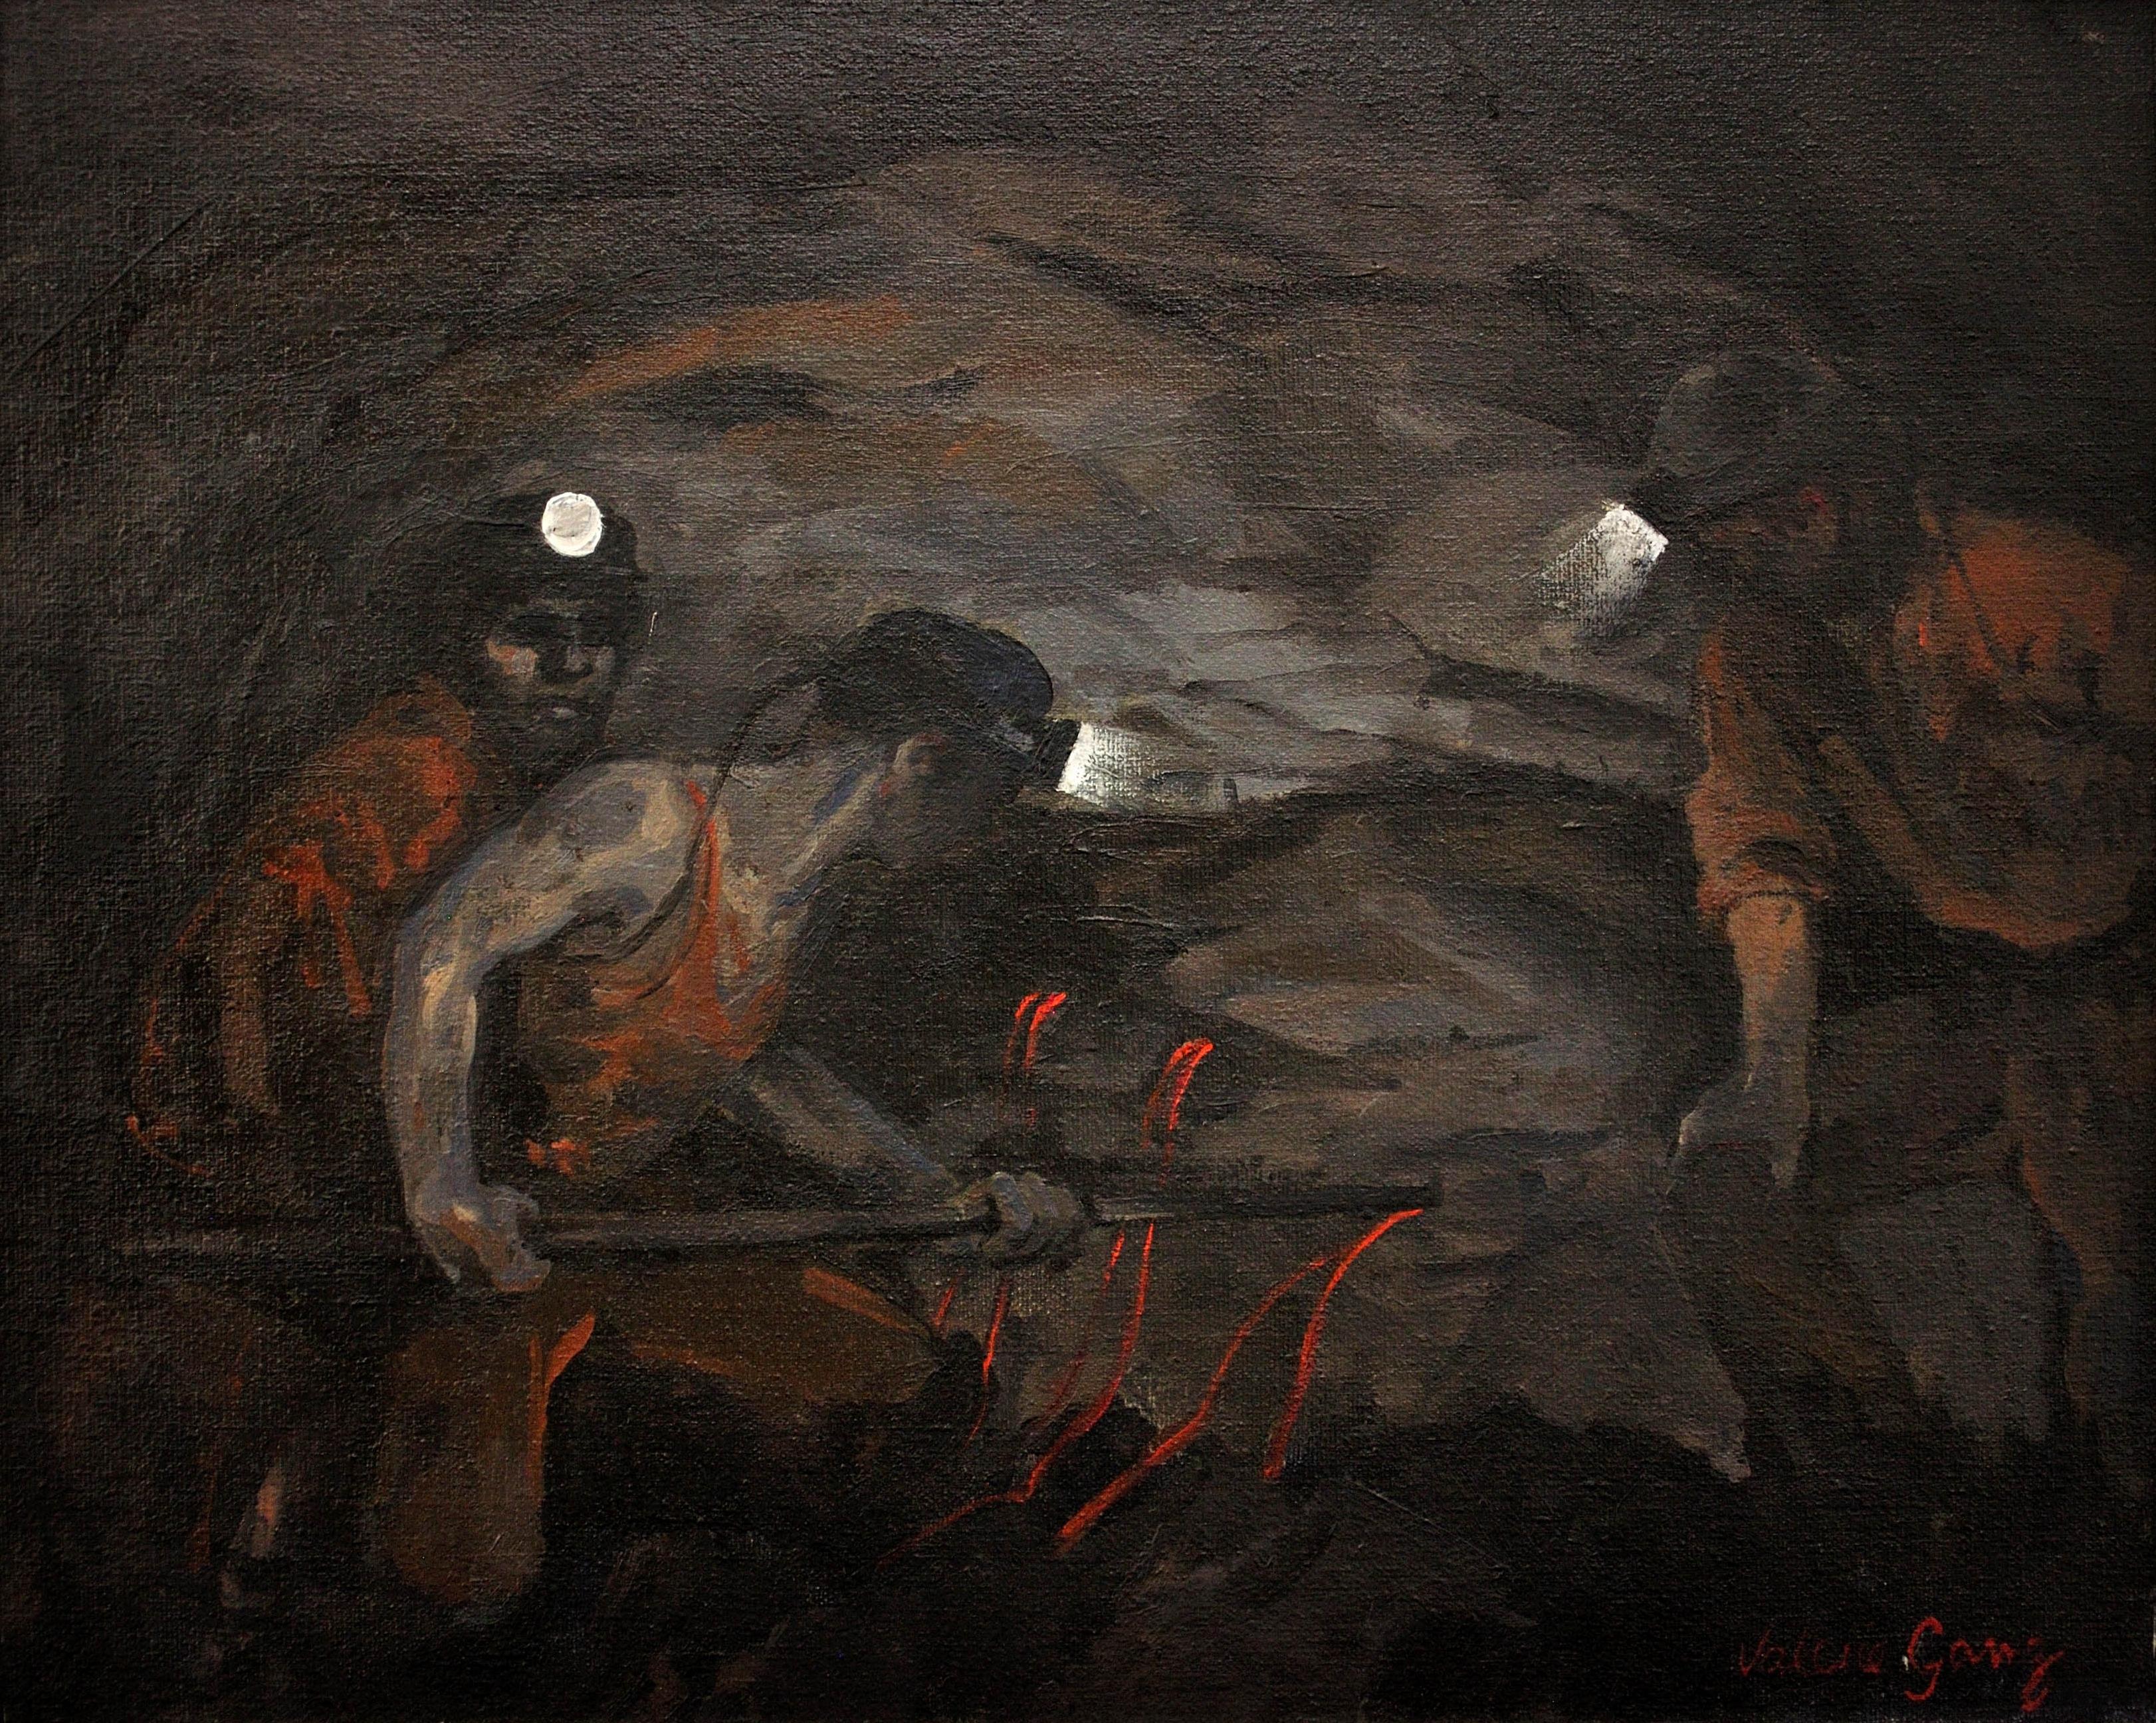 Firing. Setting & Detonation of Explosive Charges Underground Welsh Coalminers - Painting by Valerie Ganz